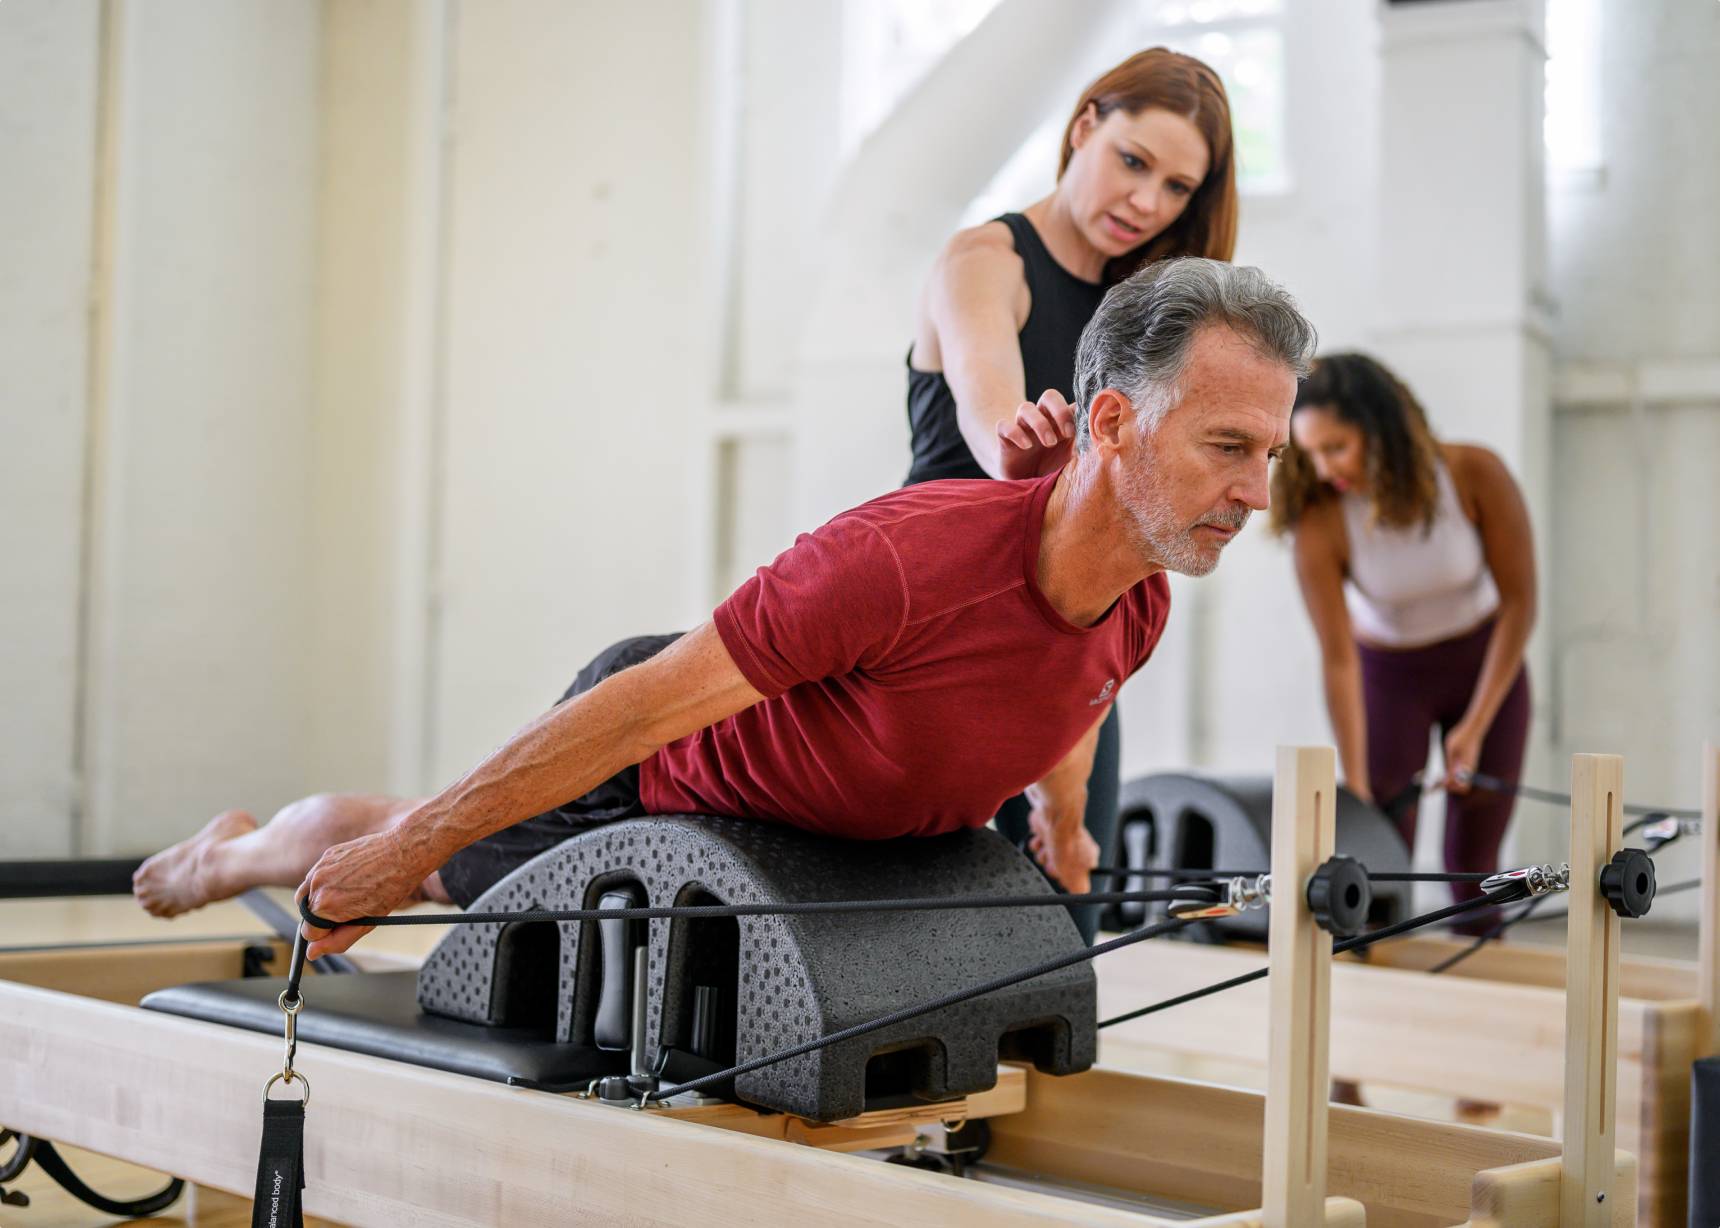 A man engaging in a workout on a Pilates reformer under the guidance of an instructor.